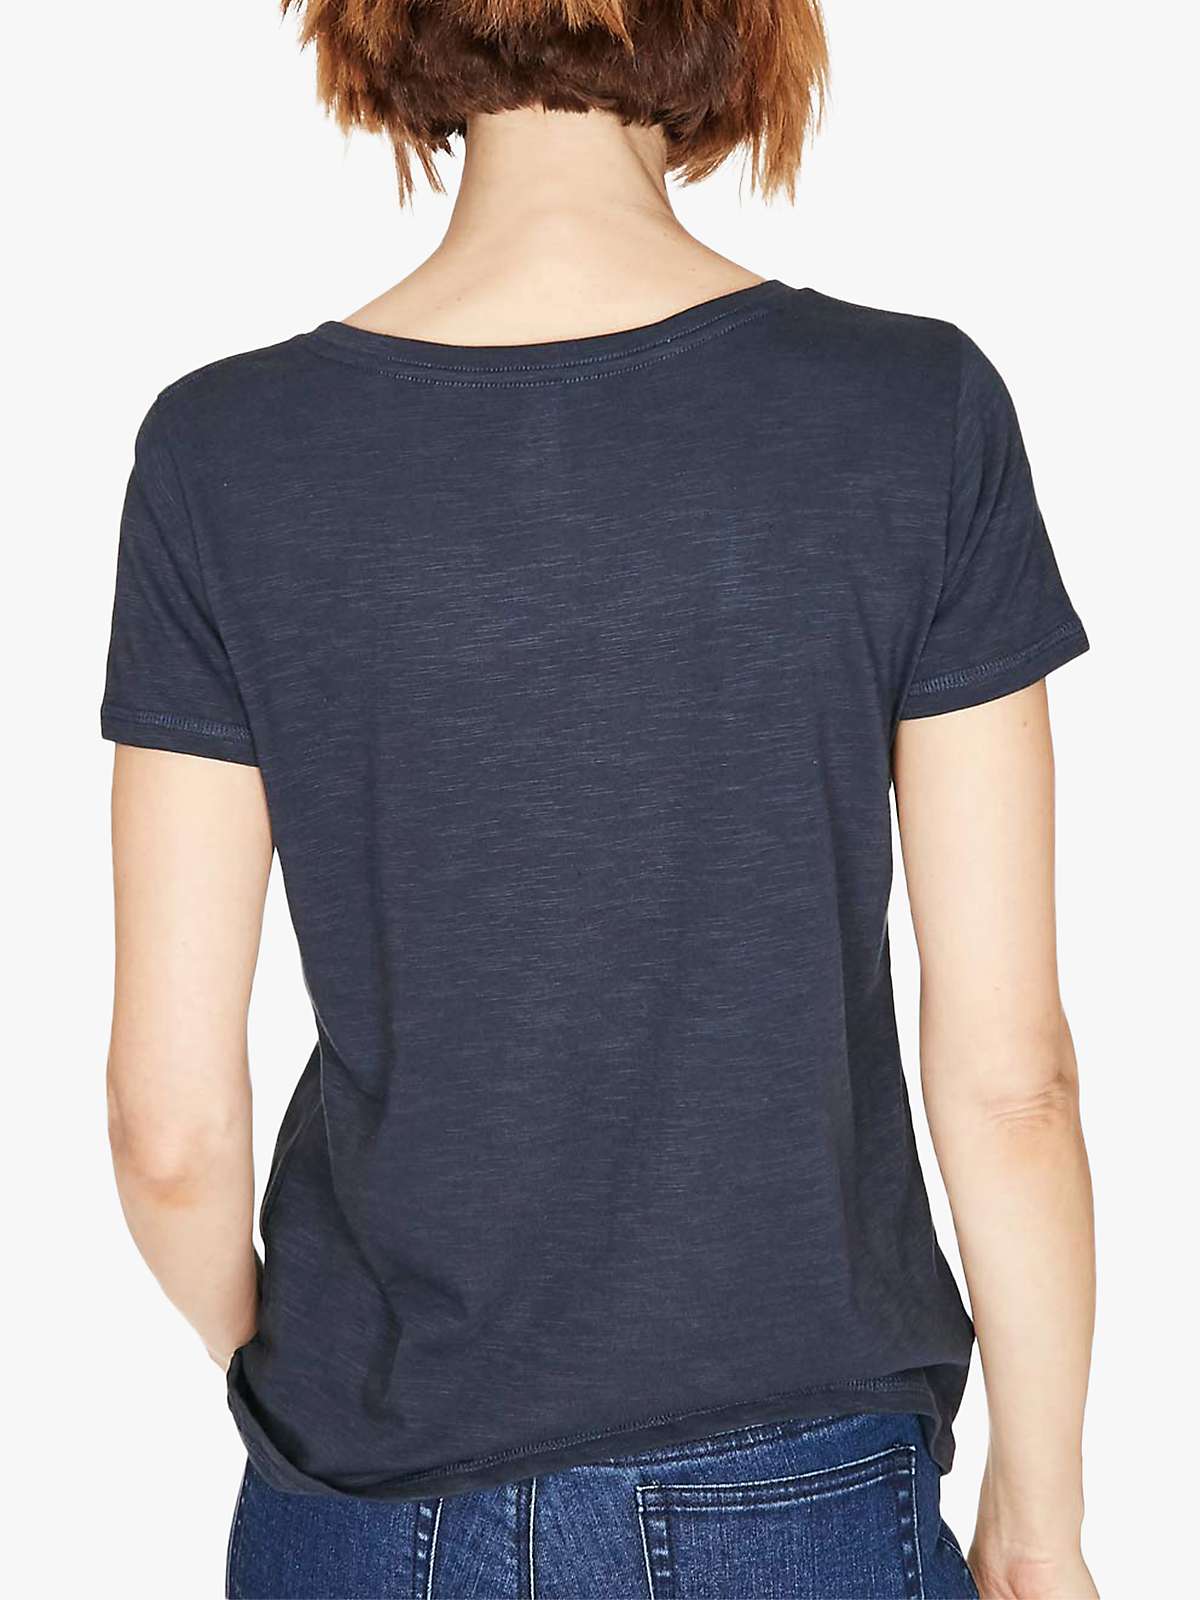 Buy Thought Organic Cotton T-Shirt Online at johnlewis.com